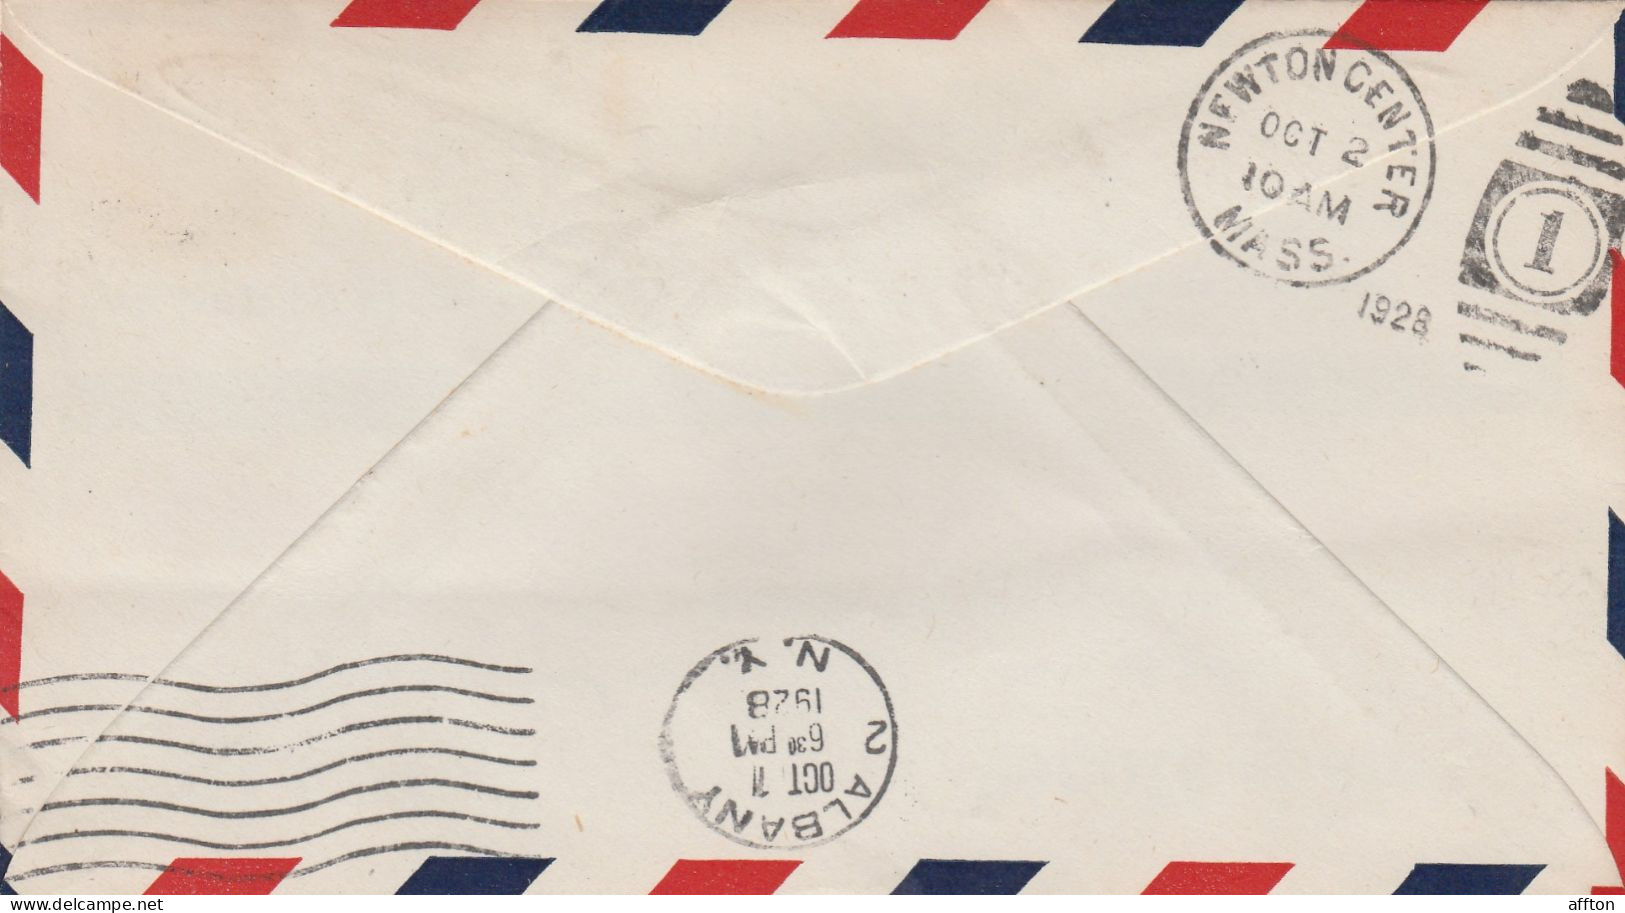 Montreal To Albany Canada 1928 Air Mail Cover Mailed - Luftpost